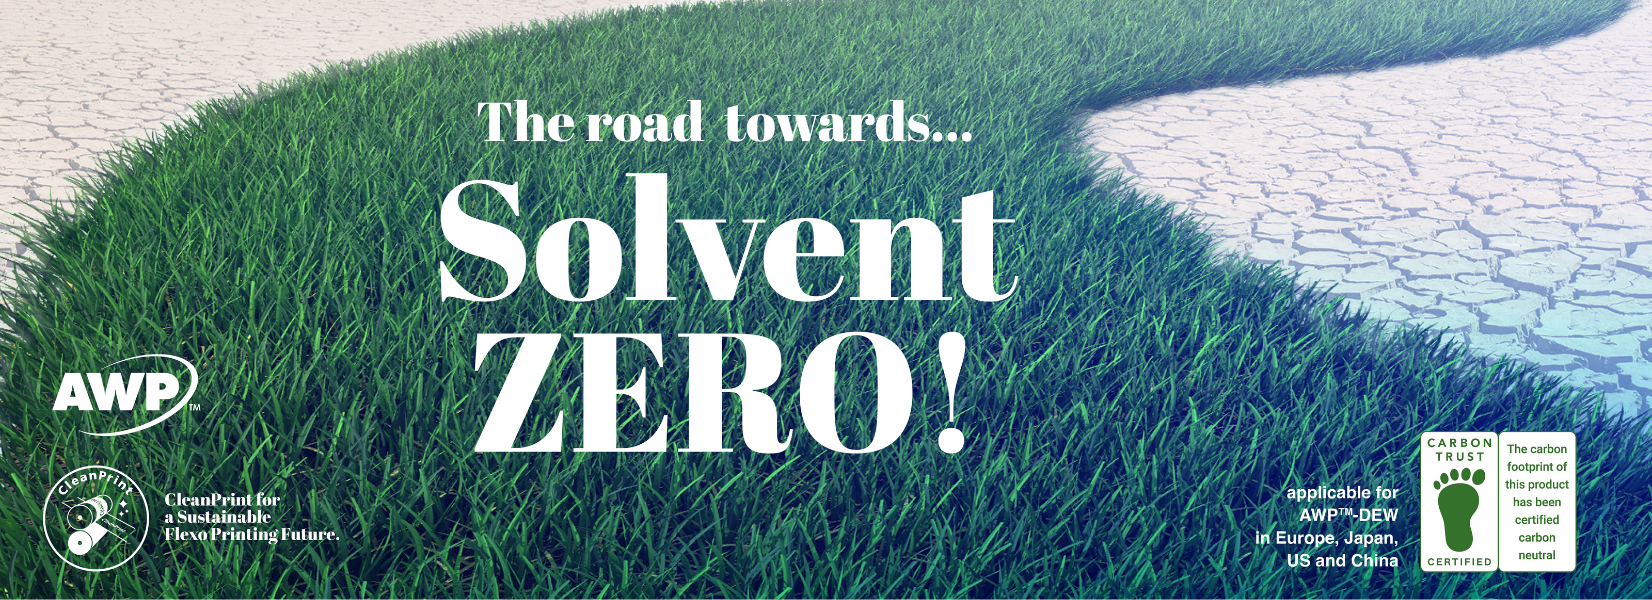 Green grass path with the text: The road towards... Solvent ZERO!